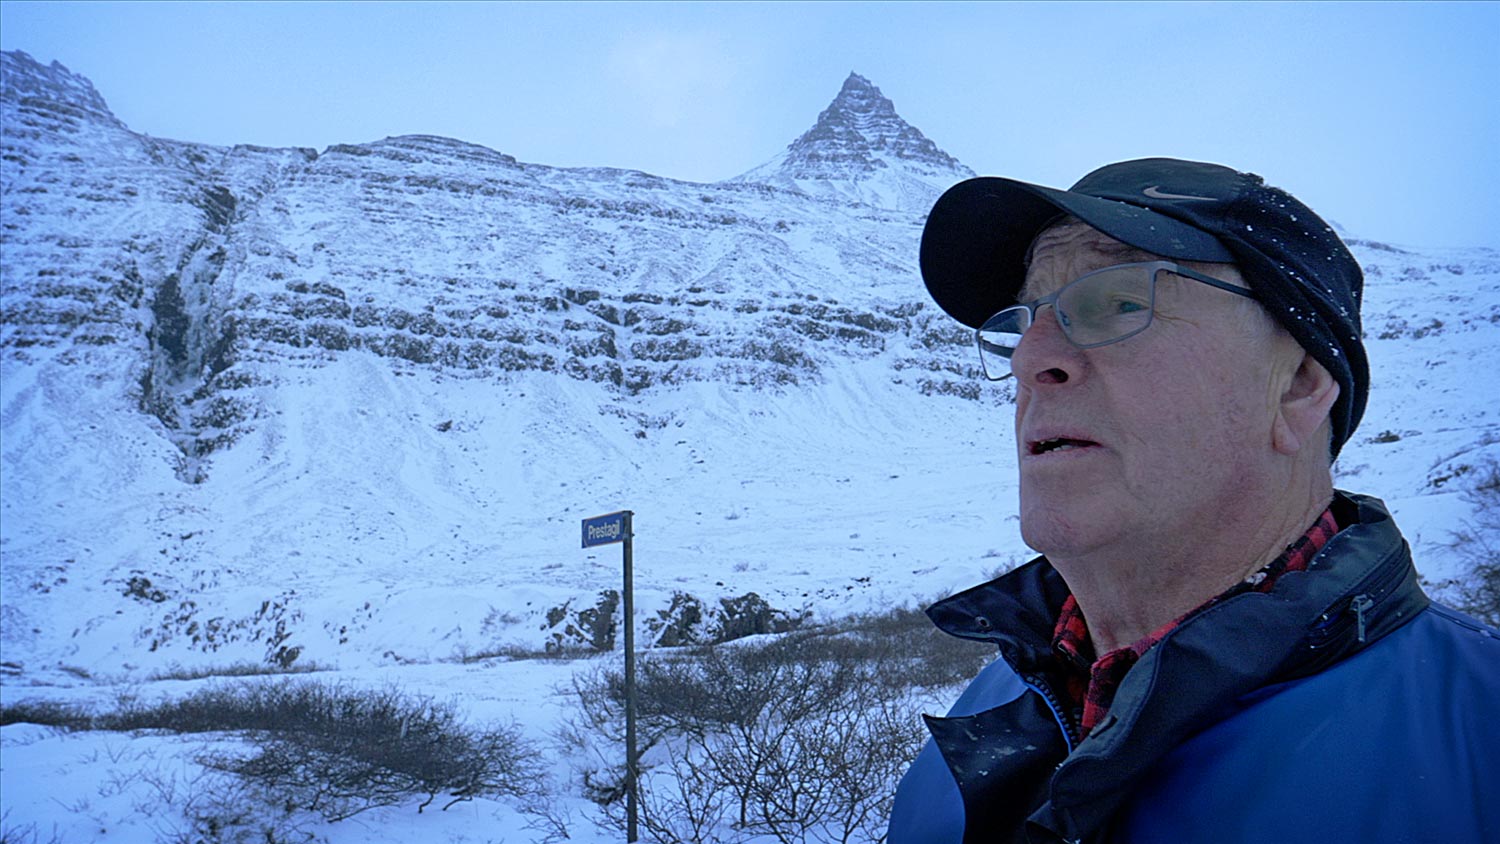 An old man with a cap in a snowy landscape, mountain in the background